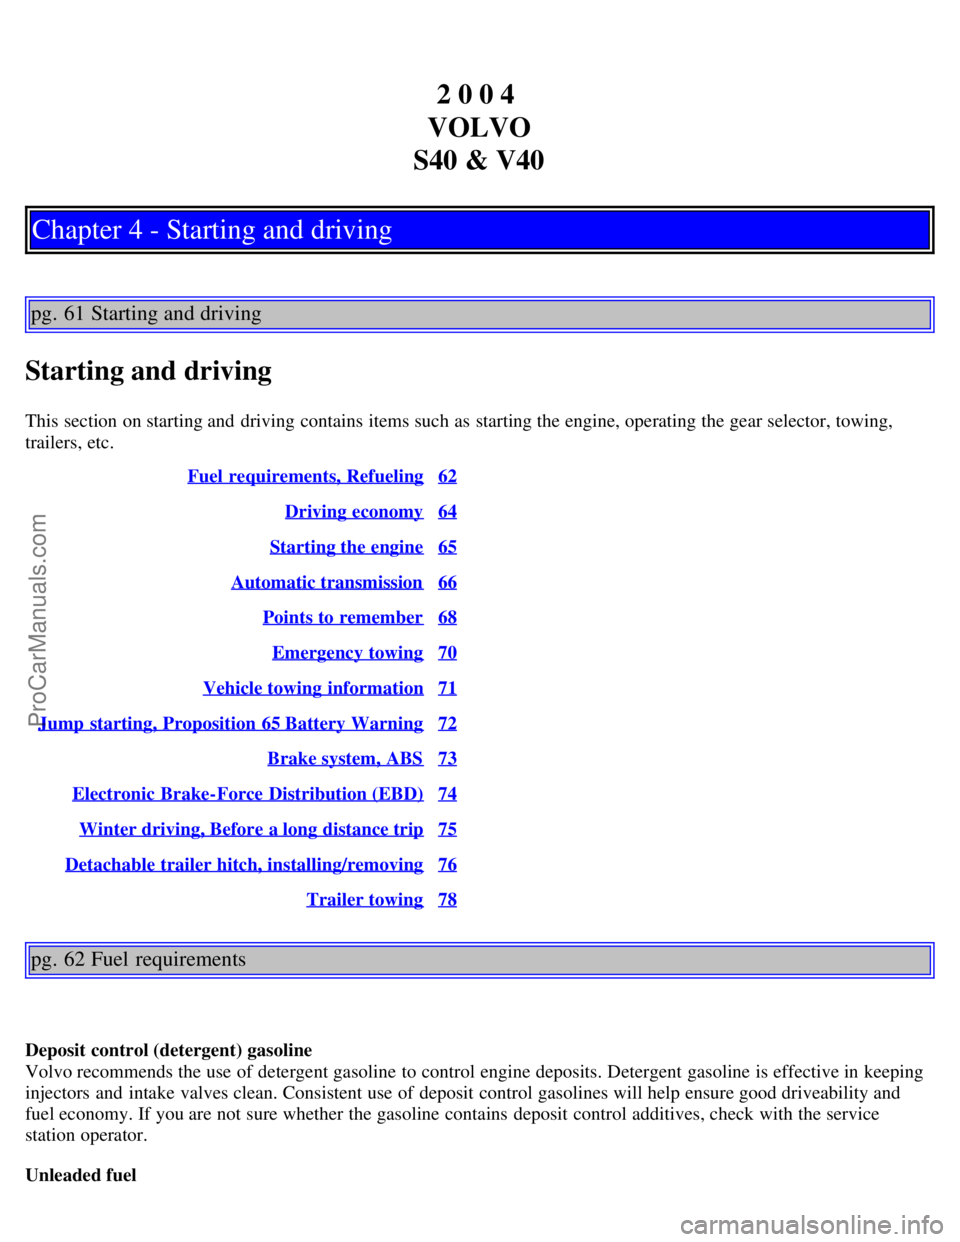 VOLVO V4 2004  Owners Manual 2 0 0 4 
VOLVO
S40 & V40
Chapter 4 - Starting and driving
pg. 61 Starting and driving
Starting and driving
This section on starting and  driving contains items such as starting the engine, operating t